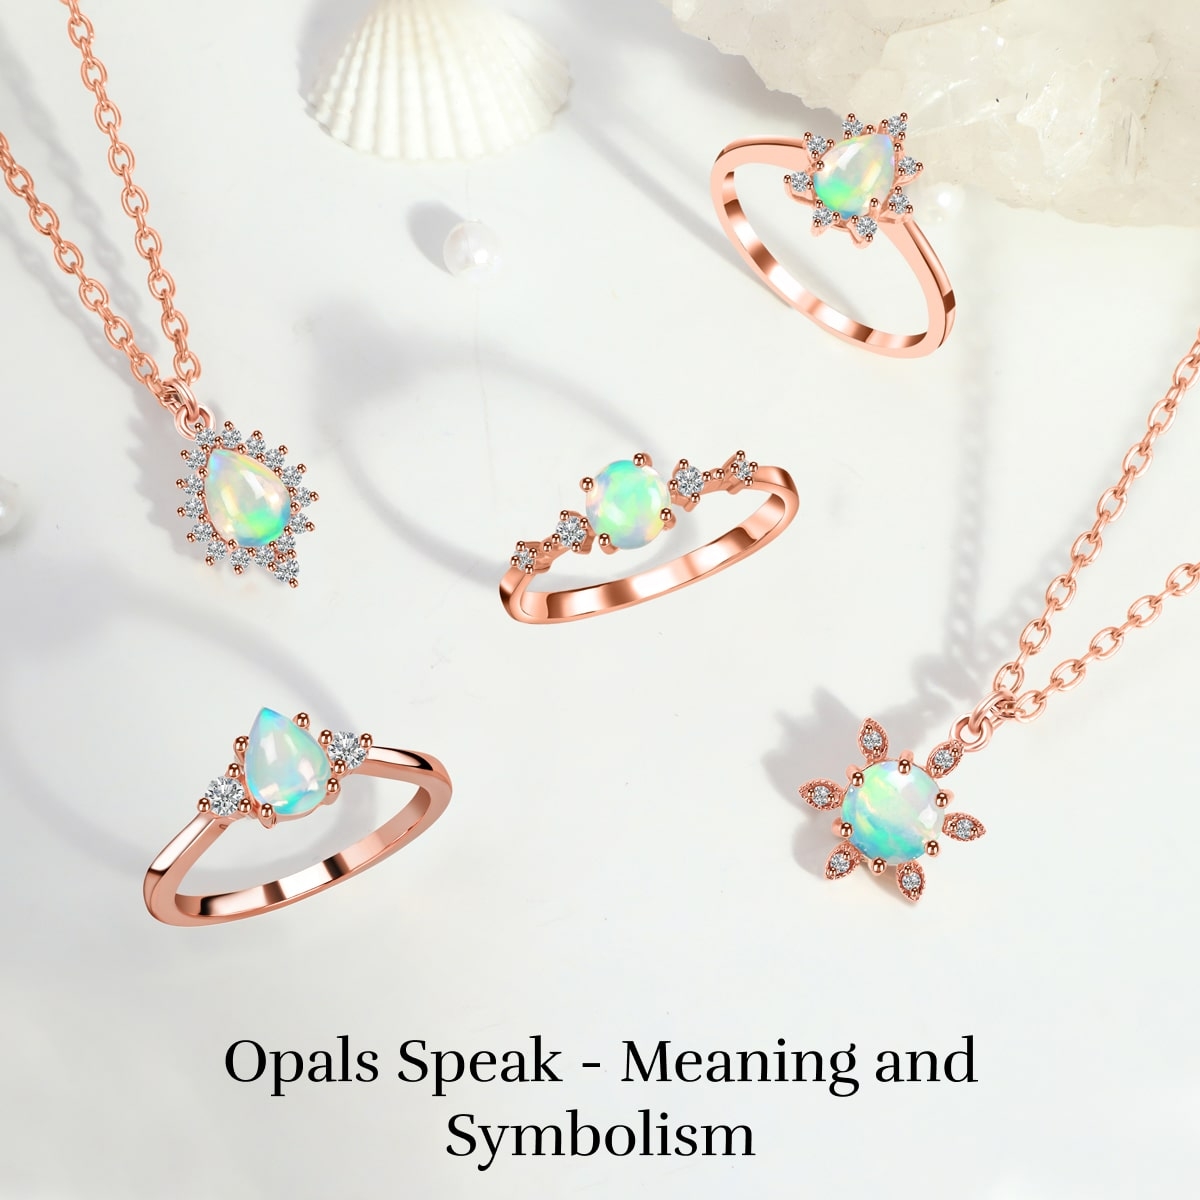 The Meaning and Symbolism of Opals